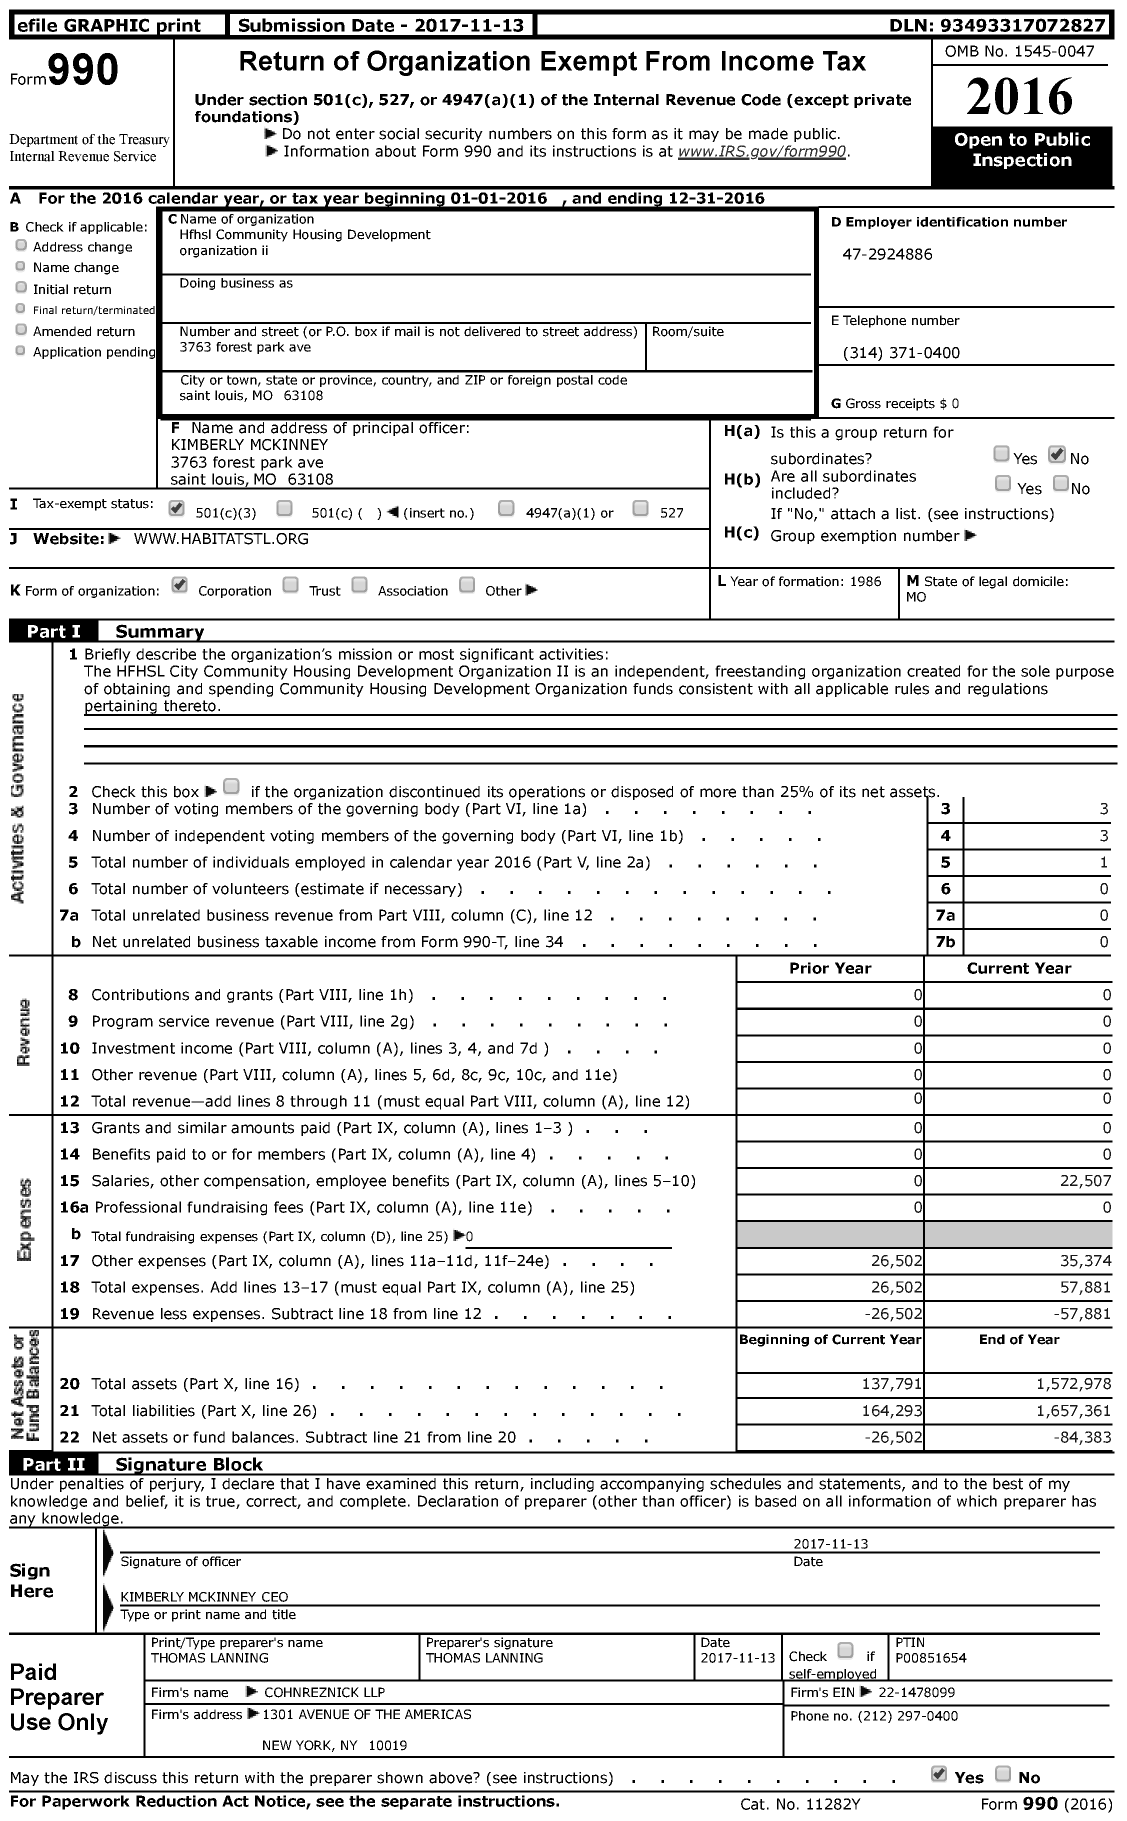 Image of first page of 2016 Form 990 for Hfhsl Community Housing Development organization ii